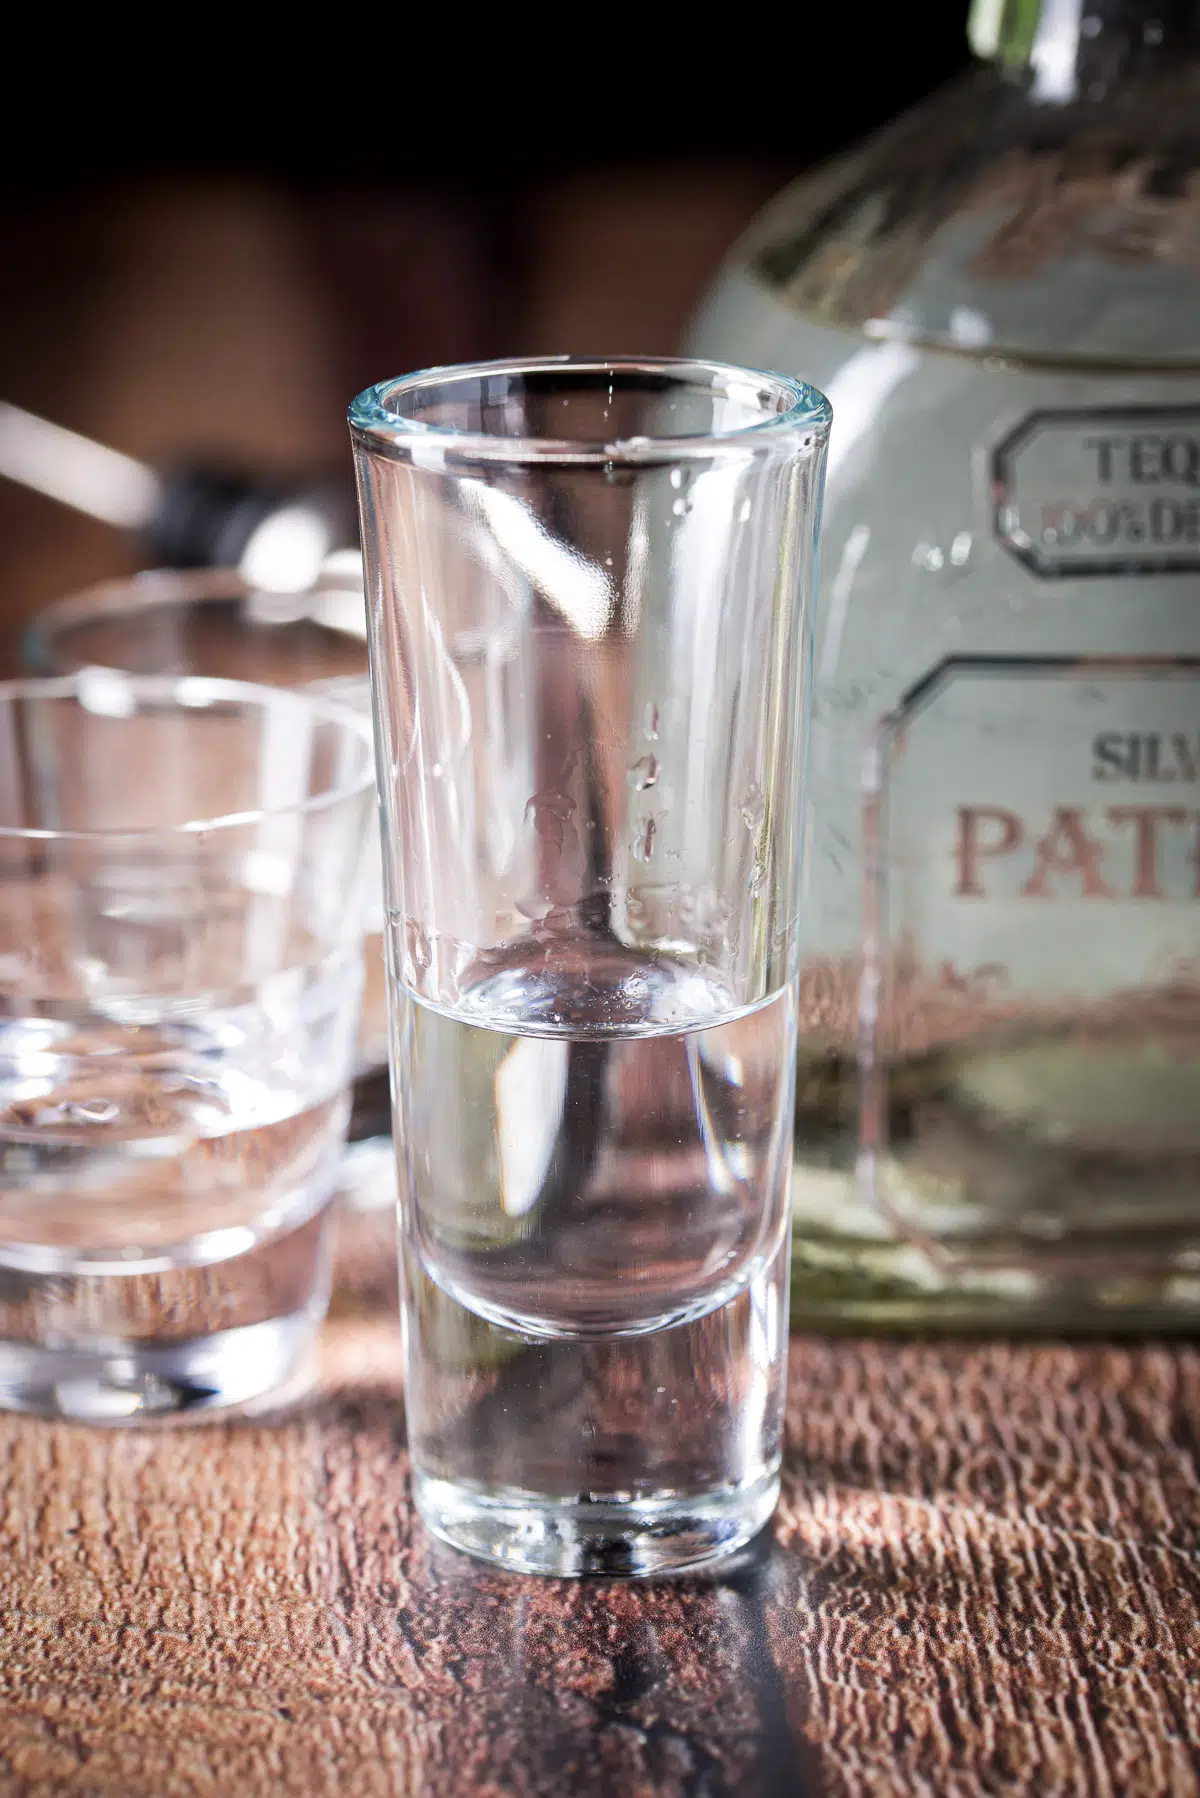 Tequila poured in the shot glasses